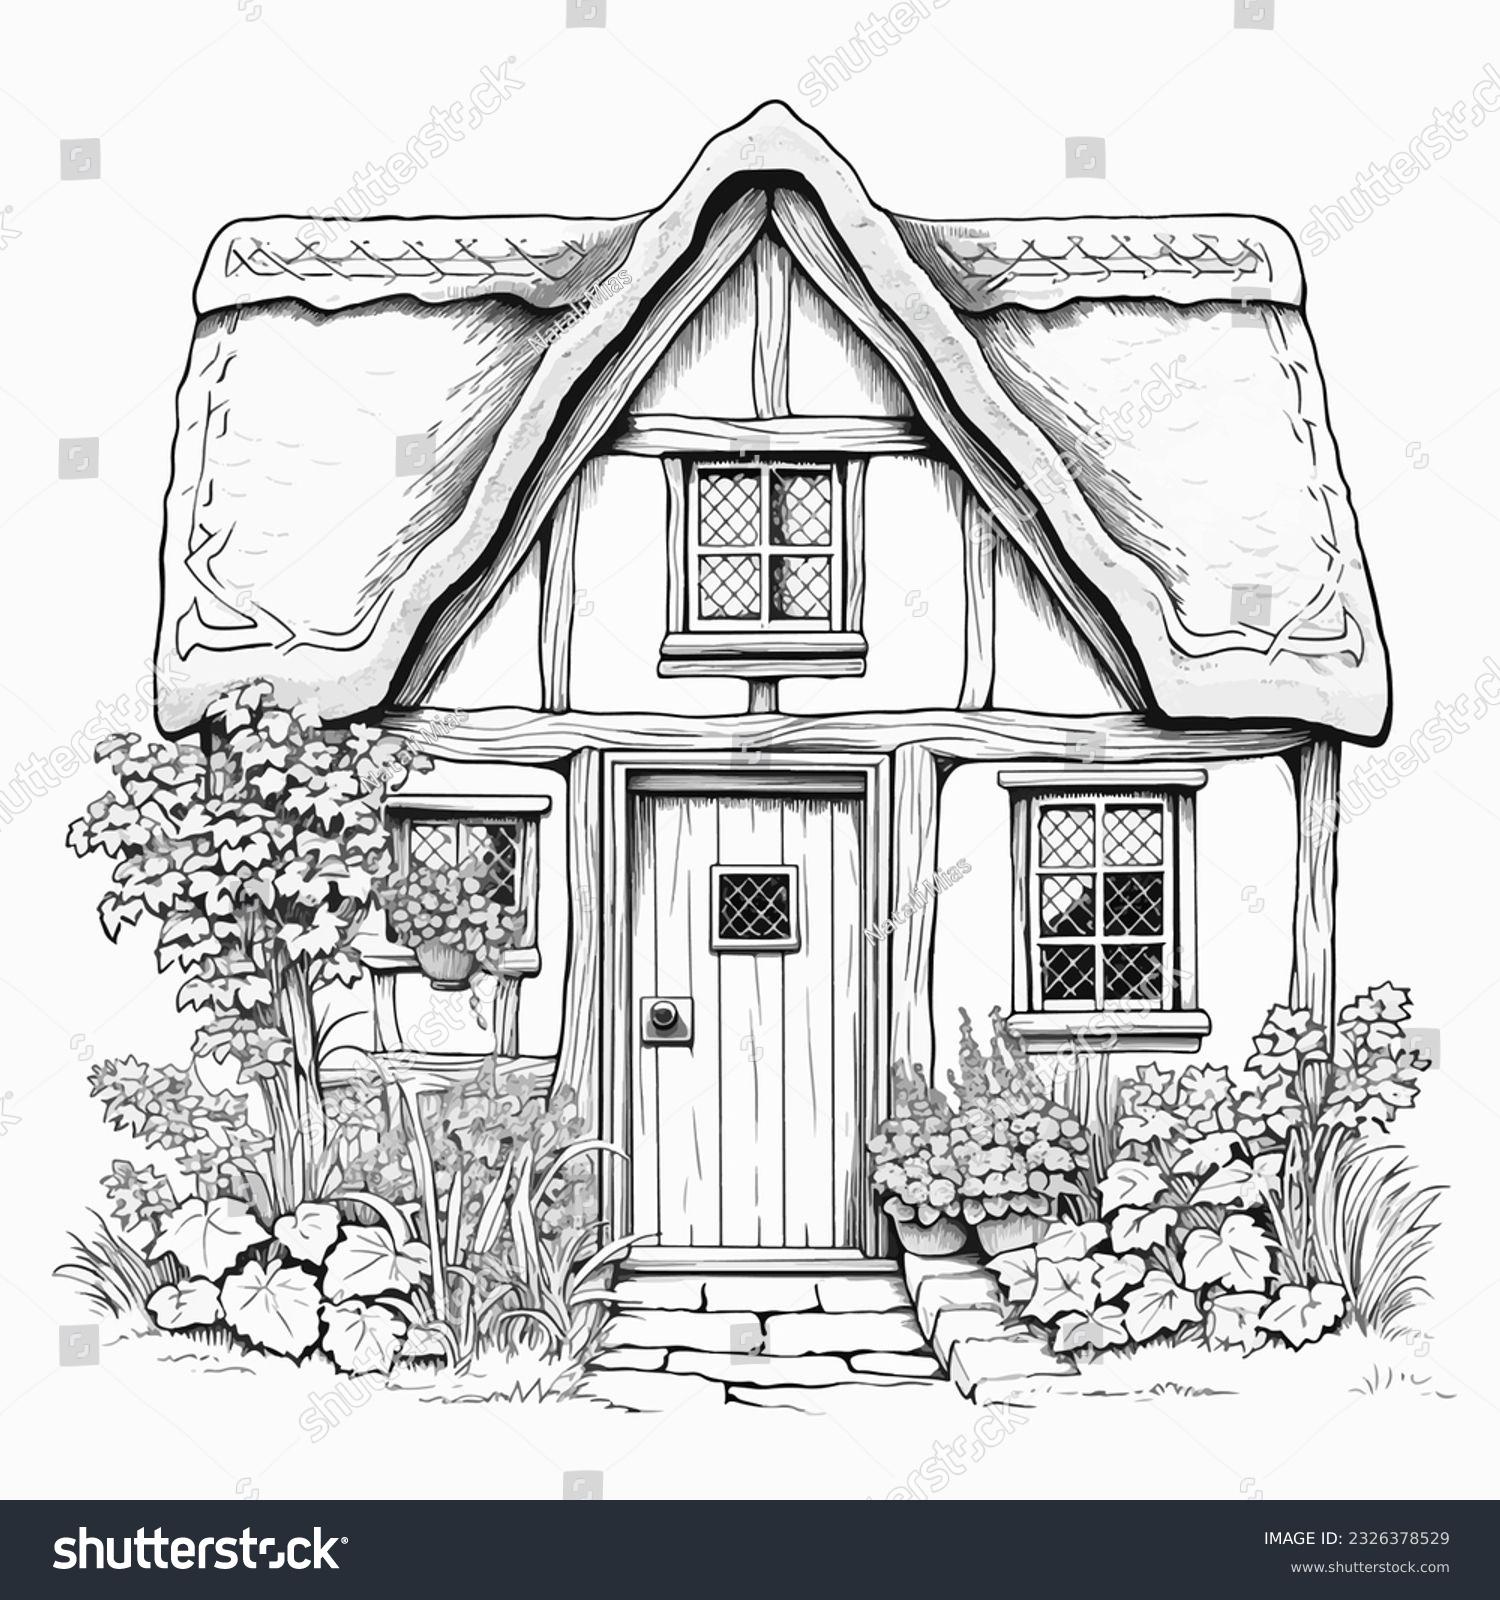 SVG of Cute English house black and white vector illustration for adult coloring. Retro style architecture cottage core style. Cozy home with chimney and roof scale. Line art medieval cottage. Detailed house svg